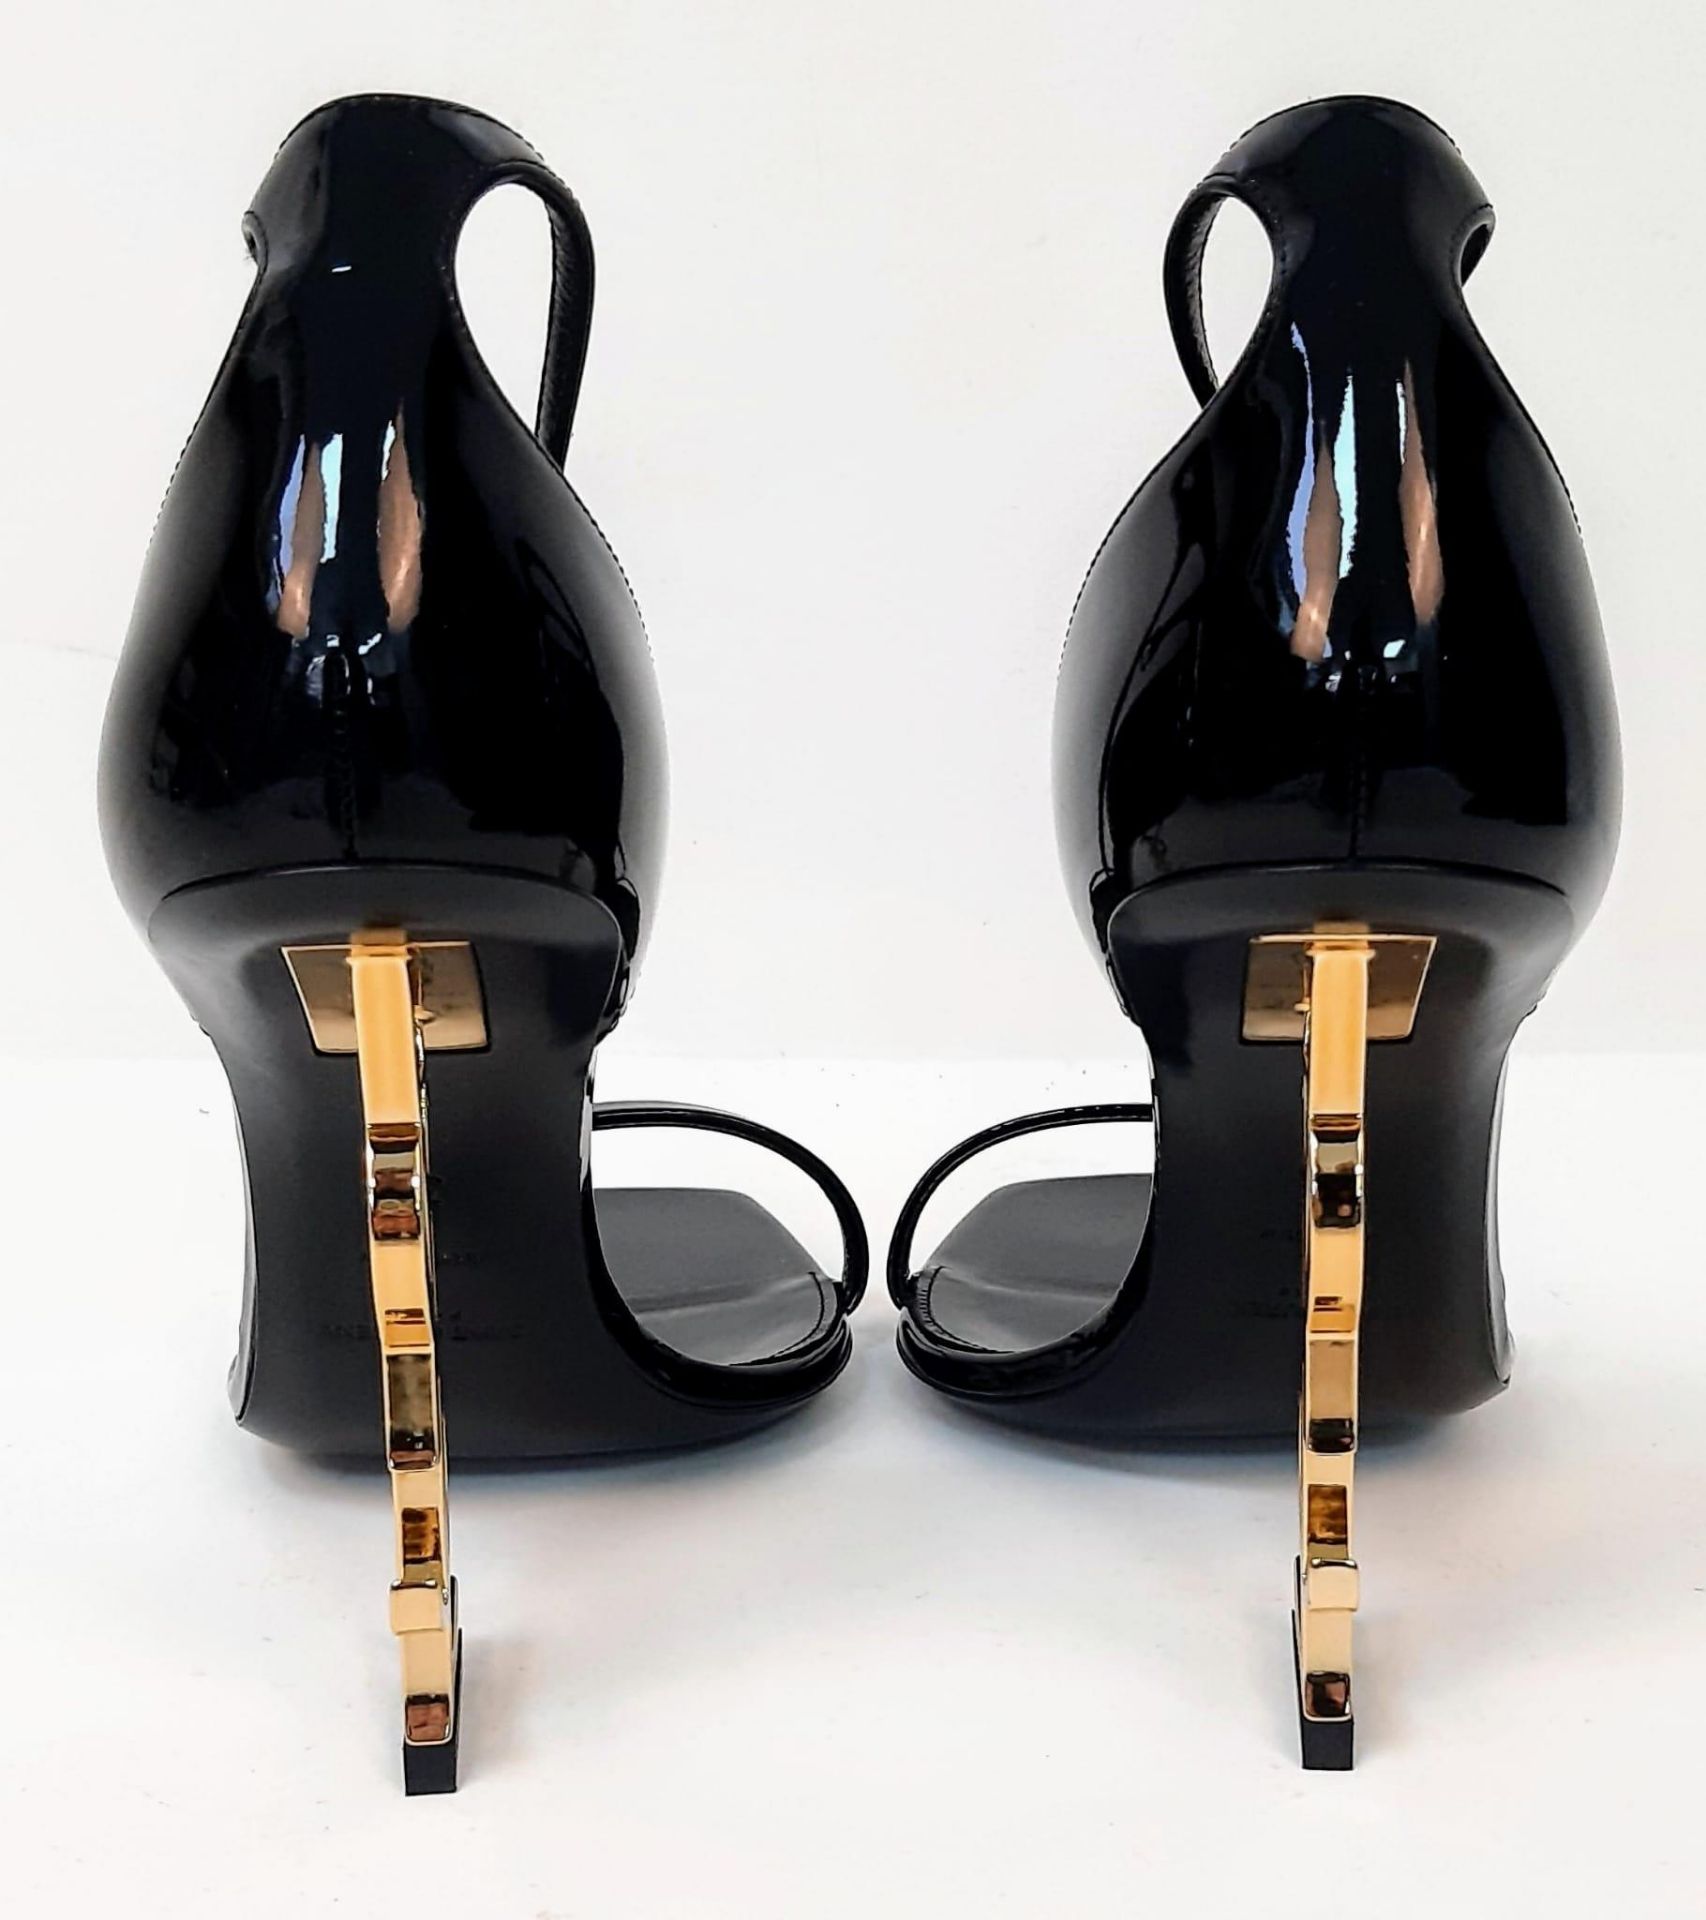 A PAIR OF NEW AND UNWORN YVES SAINT LAUREN "OPYUM" YSL HEEL COCKTAIL SHOES IN SIZE 6 UK . 39 - Image 4 of 11